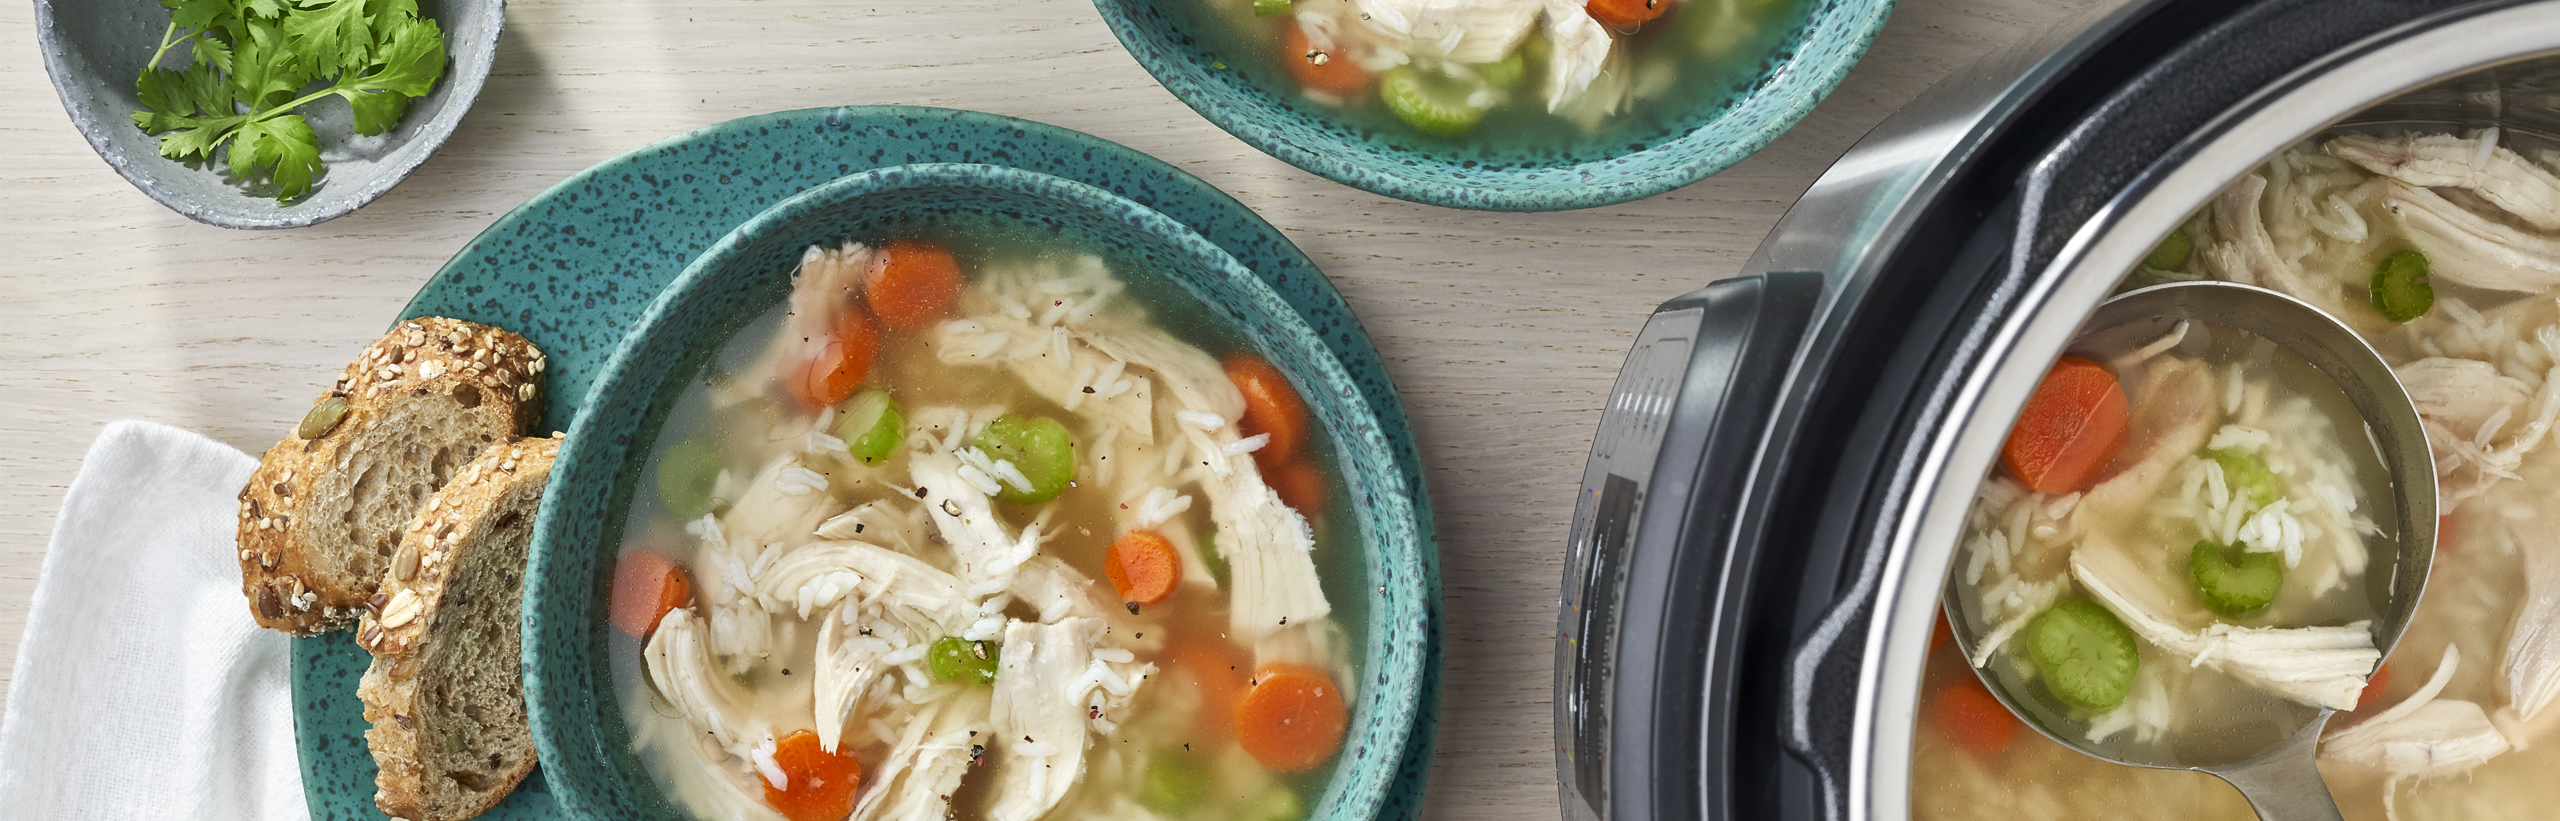 Instant Pot Chicken Soup with Rice (from Scratch) - DadCooksDinner